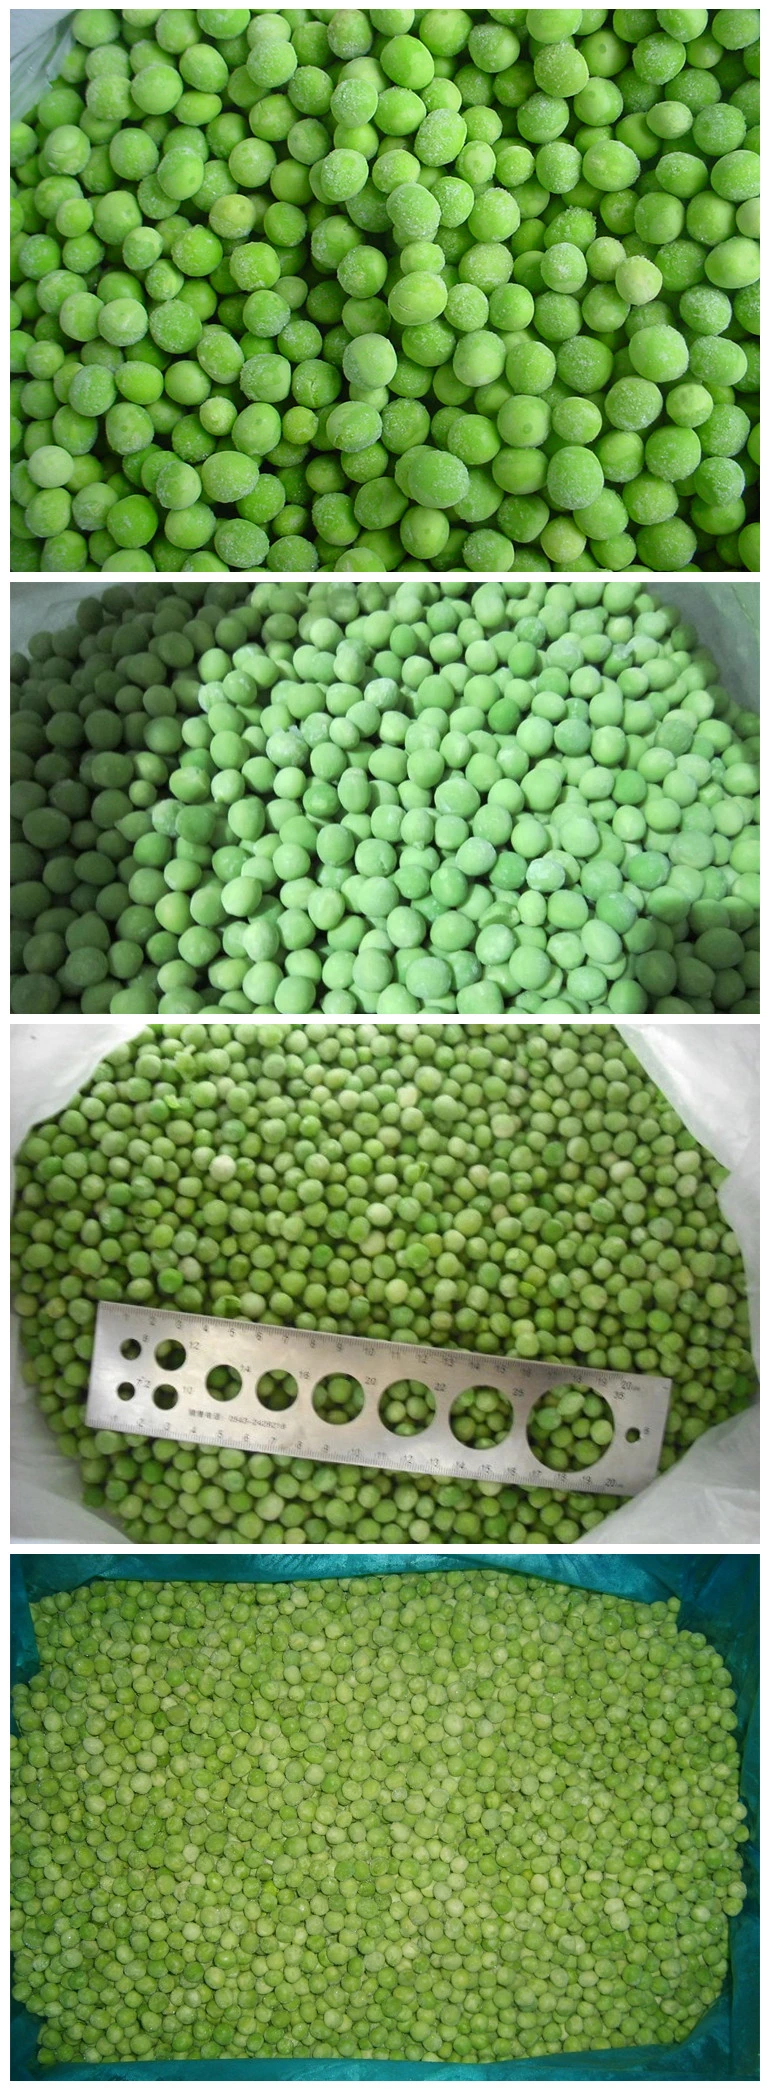 Frozen Green Pea with The New Season